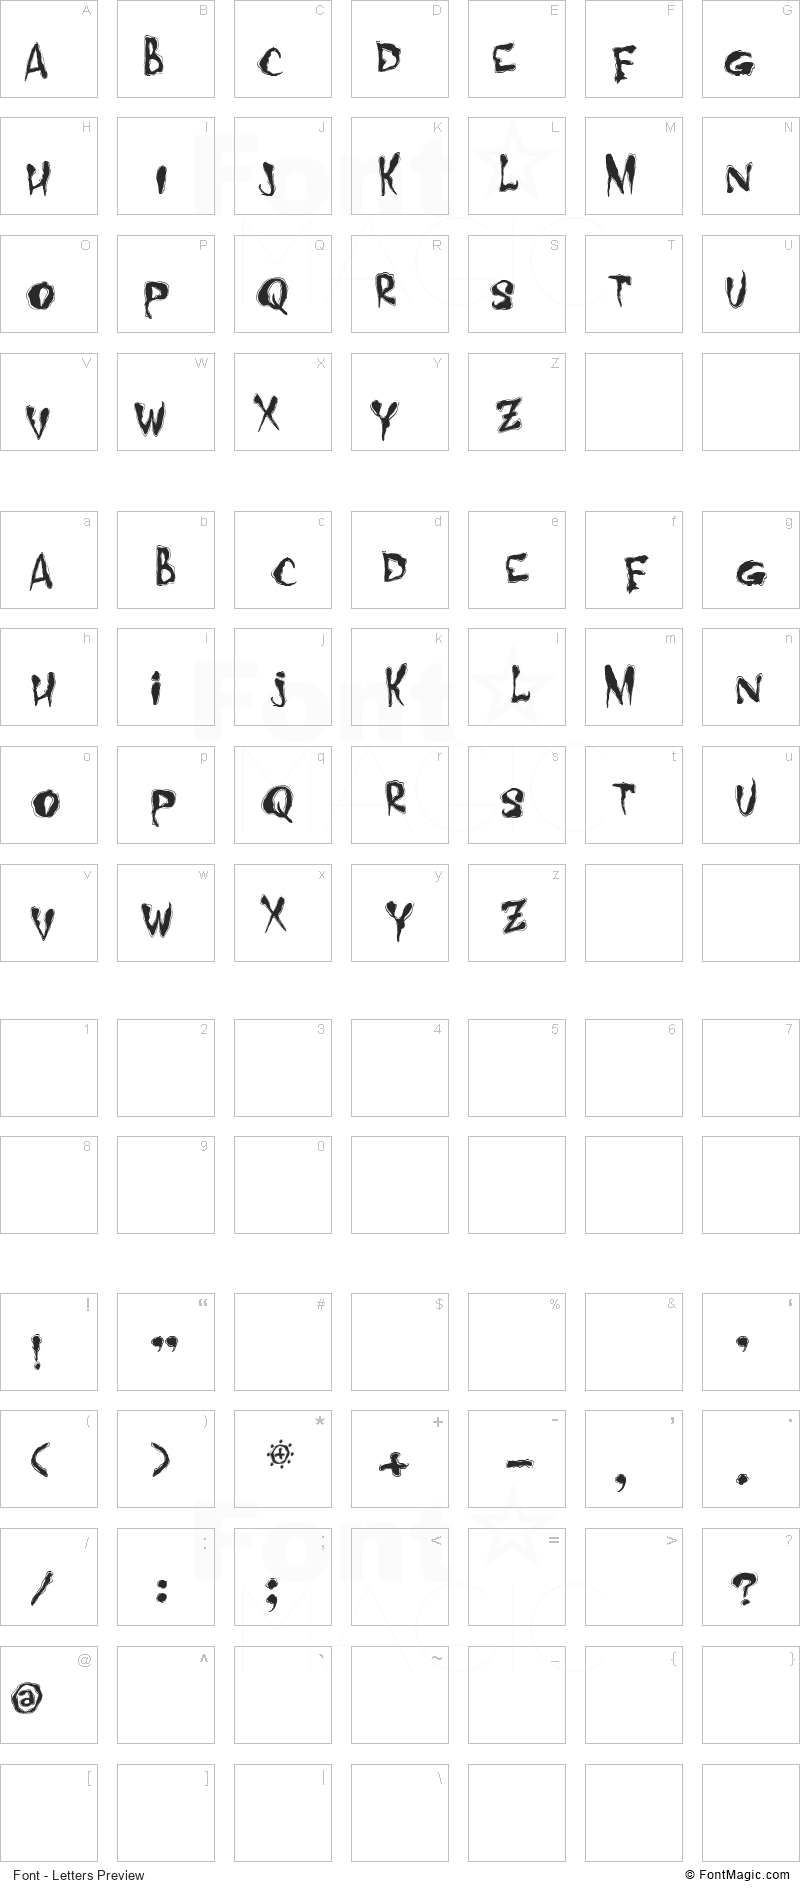 Midnight Hour Font - All Latters Preview Chart